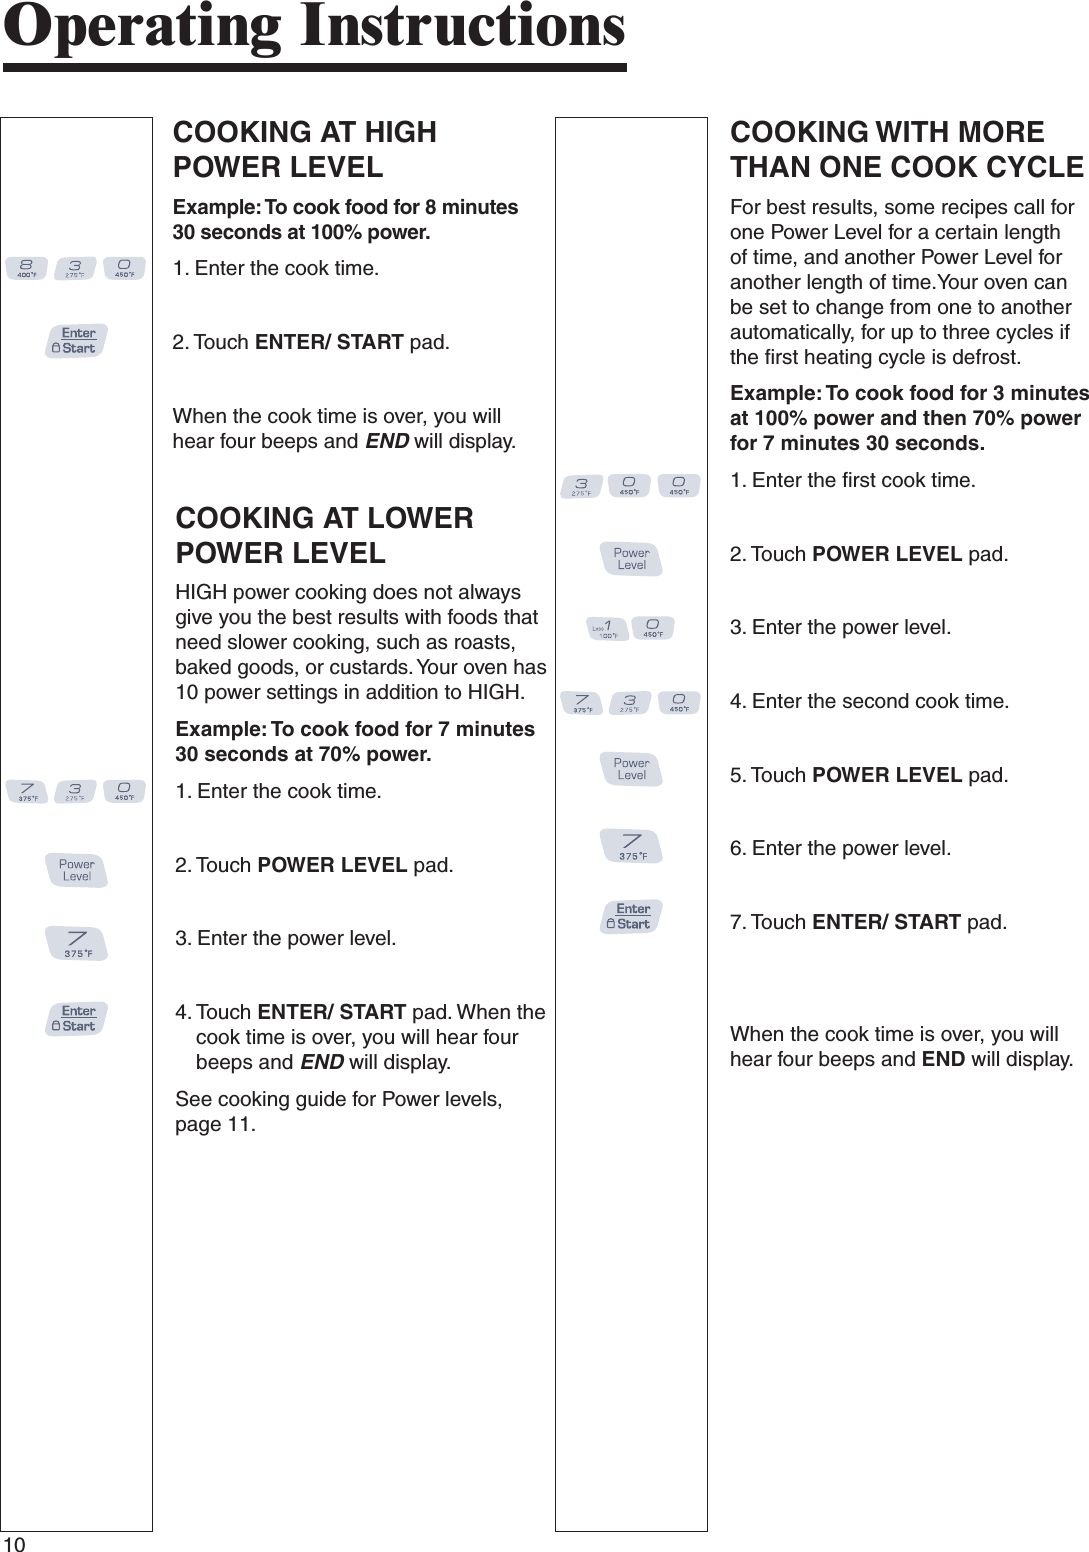 10COOKING AT LOWER POWER LEVELHIGH power cooking does not always give you the best results with foods that need slower cooking, such as roasts, baked goods, or custards. Your oven has 10 power settings in addition to HIGH.Example: To cook food for 7 minutes 30 seconds at 70% power.1.  Enter the cook time.2.  Touch POWER LEVEL pad.3.  Enter the power level.4.  Touch ENTER/ START pad. When the cook time is over, you will hear four beeps and END will display.See cooking guide for Power levels, page 11.COOKING WITH MORE THAN ONE COOK CYCLEFor best results, some recipes call for one Power Level for a certain length of time, and another Power Level for another length of time.Your oven can be set to change from one to another automatically, for up to three cycles if the first heating cycle is defrost.Example: To cook food for 3 minutes at 100% power and then 70% power for 7 minutes 30 seconds.1.  Enter the first cook time.2.  Touch POWER LEVEL pad.3.  Enter the power level.4.  Enter the second cook time.5.  Touch POWER LEVEL pad.6.  Enter the power level.7.  Touch ENTER/ START pad.   When the cook time is over, you will hear four beeps and END will display.COOKING AT HIGH POWER LEVELExample: To cook food for 8 minutes 30 seconds at 100% power.1.  Enter the cook time.2.  Touch ENTER/ START pad.     When the cook time is over, you will hear four beeps and END will display.Operating Instructions